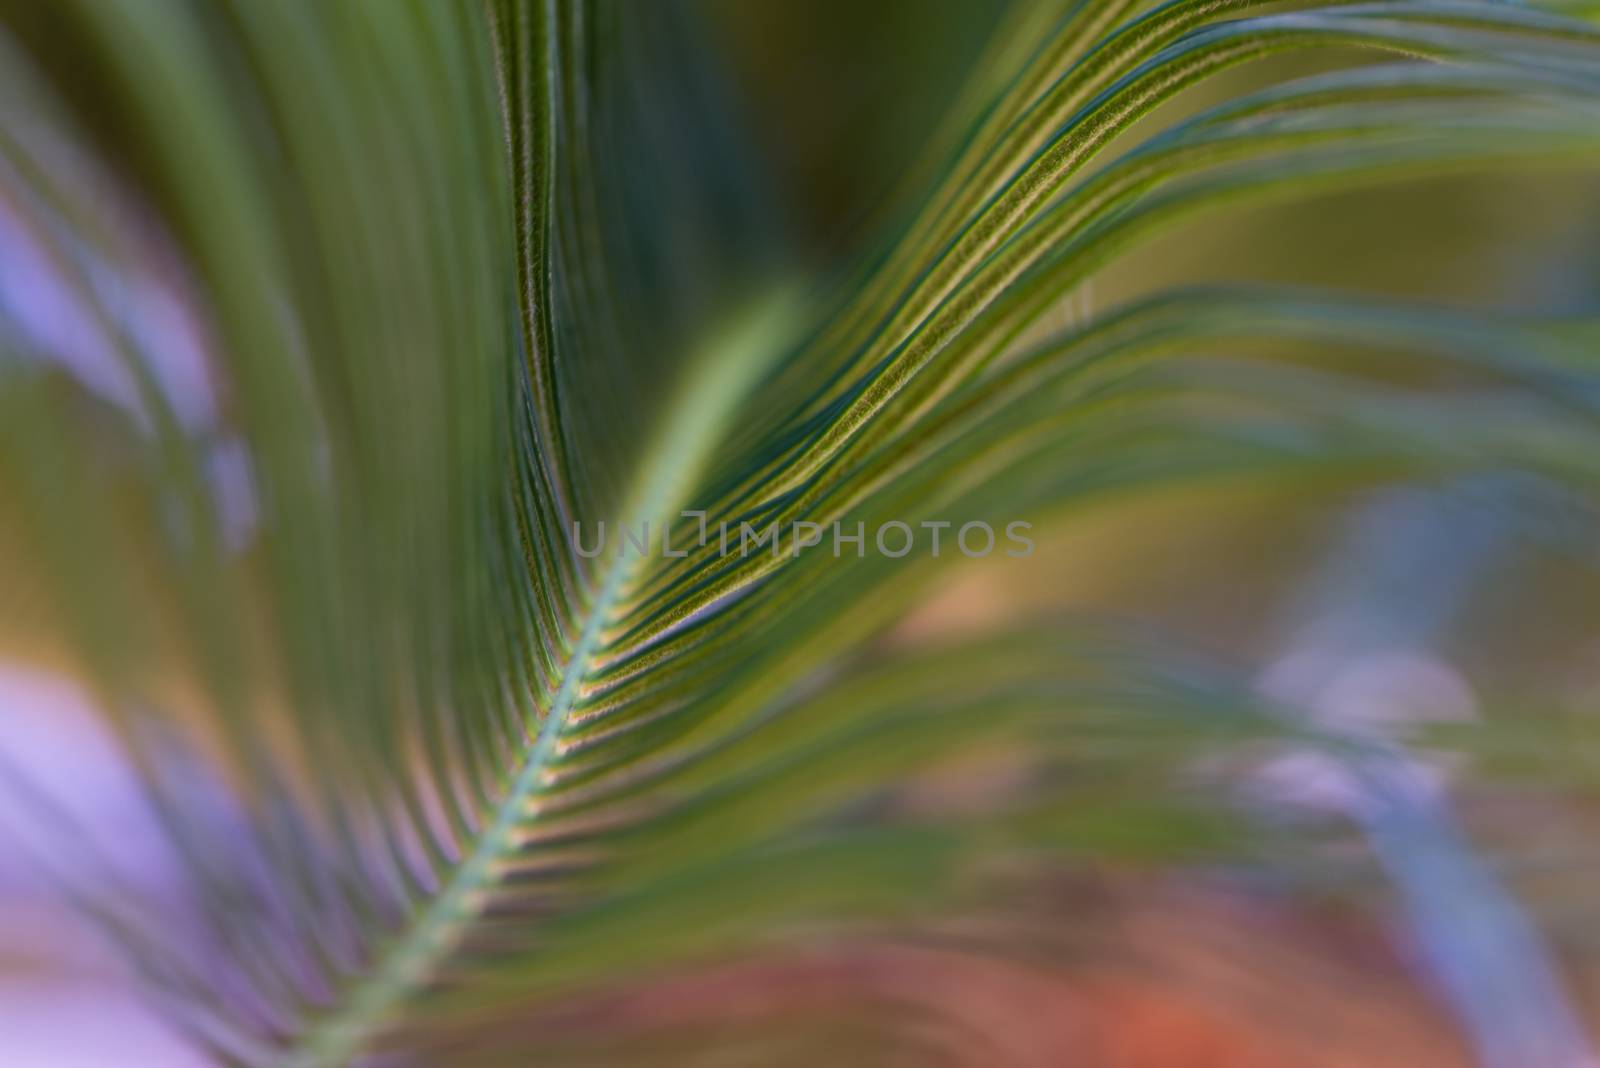 A close up blur of palm branch curving through the frame.